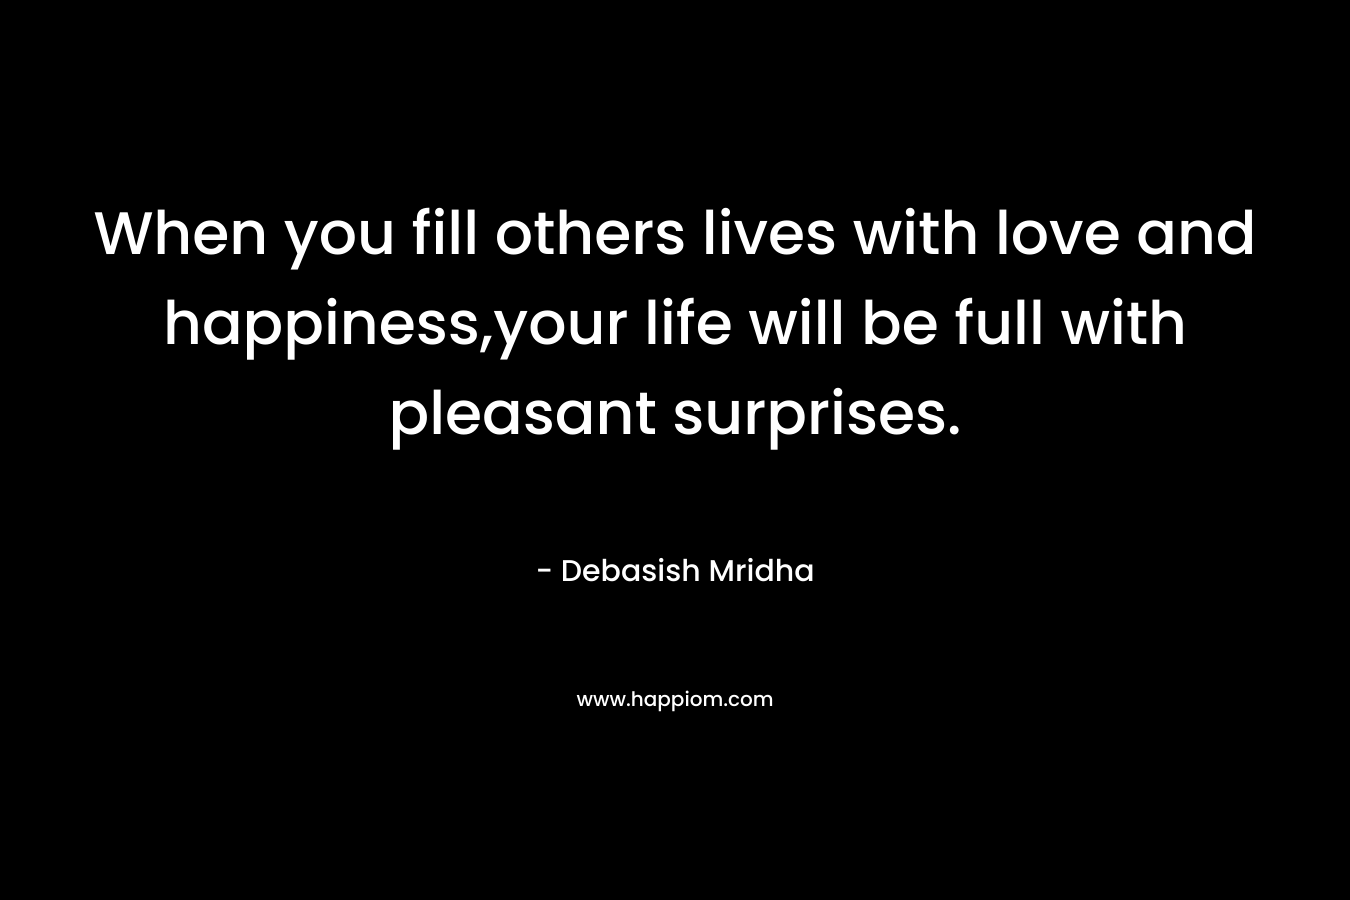 When you fill others lives with love and happiness,your life will be full with pleasant surprises.